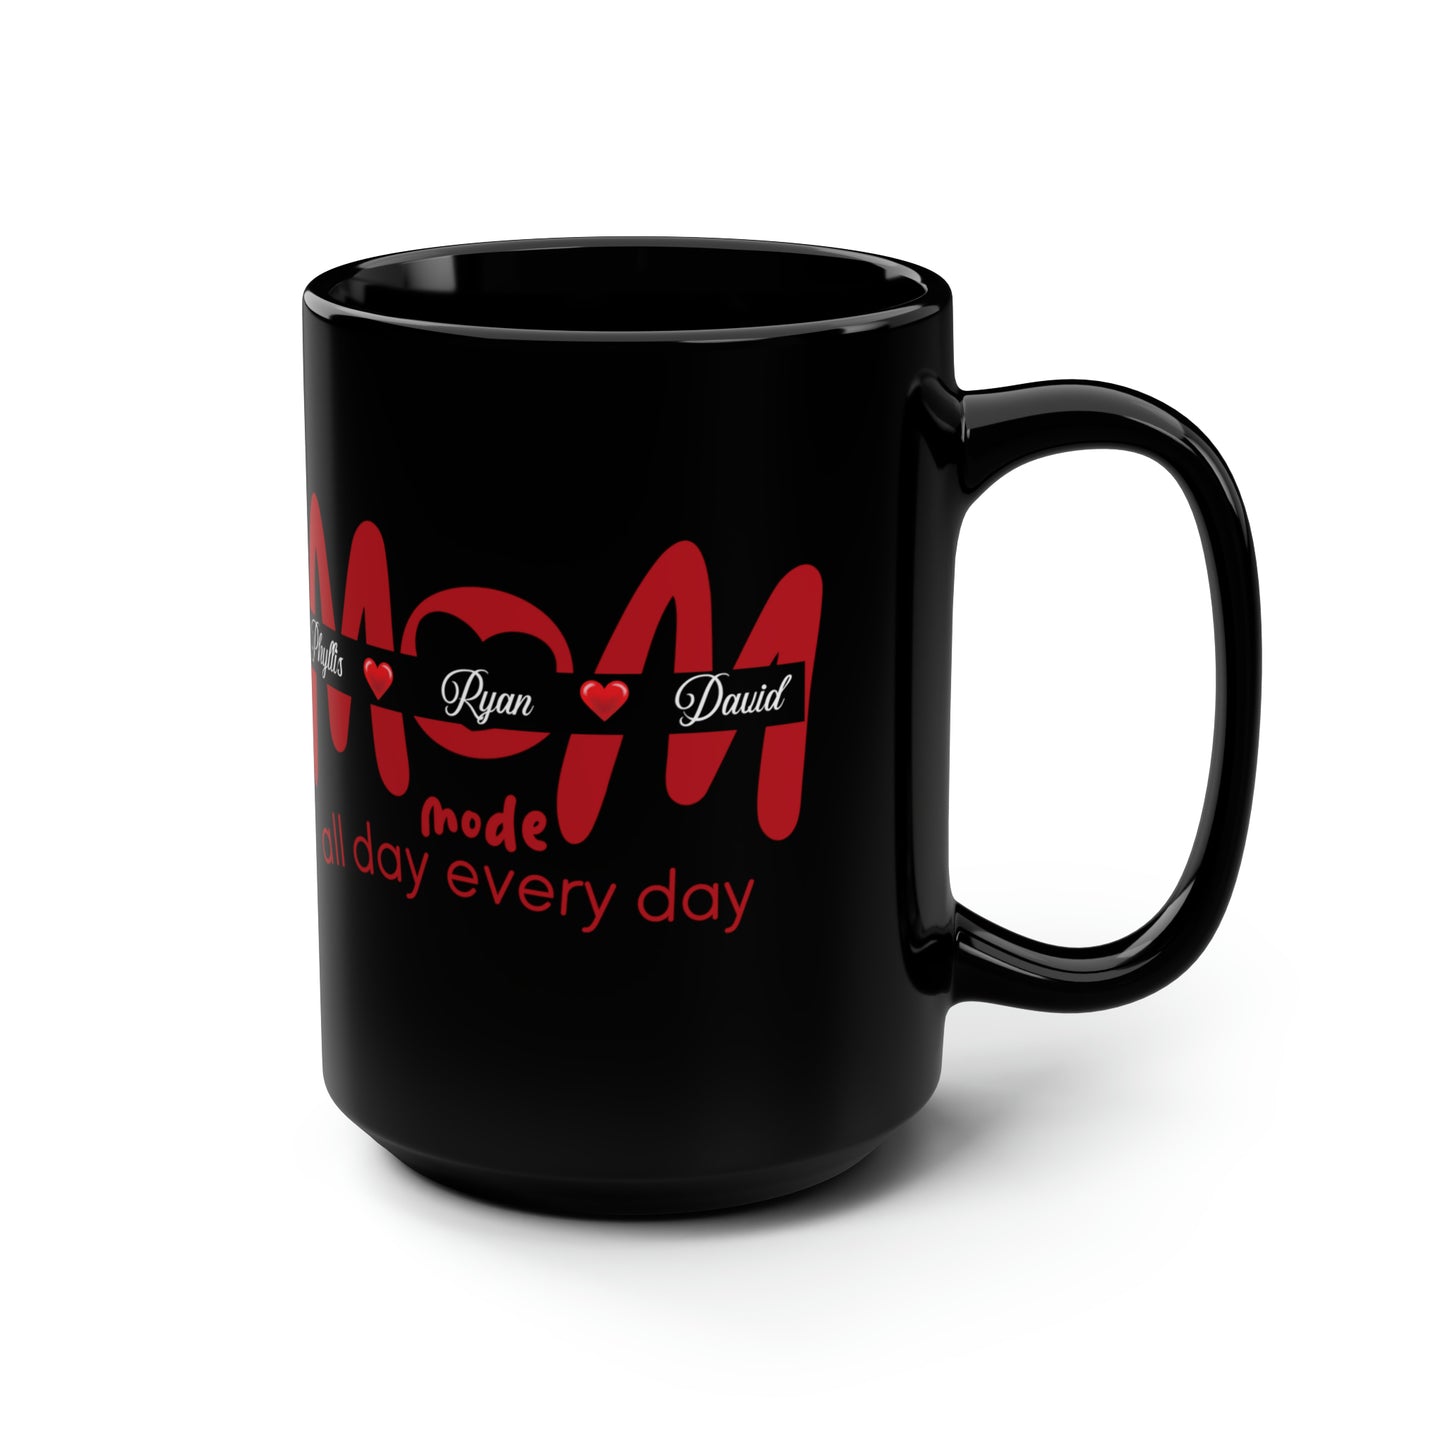 Personalized Mom Coffee Mug with kids names, Valentine's Day gift, Mother's Day gift, Mom birthday gift, mom coffee mug, Black Mug, 15oz